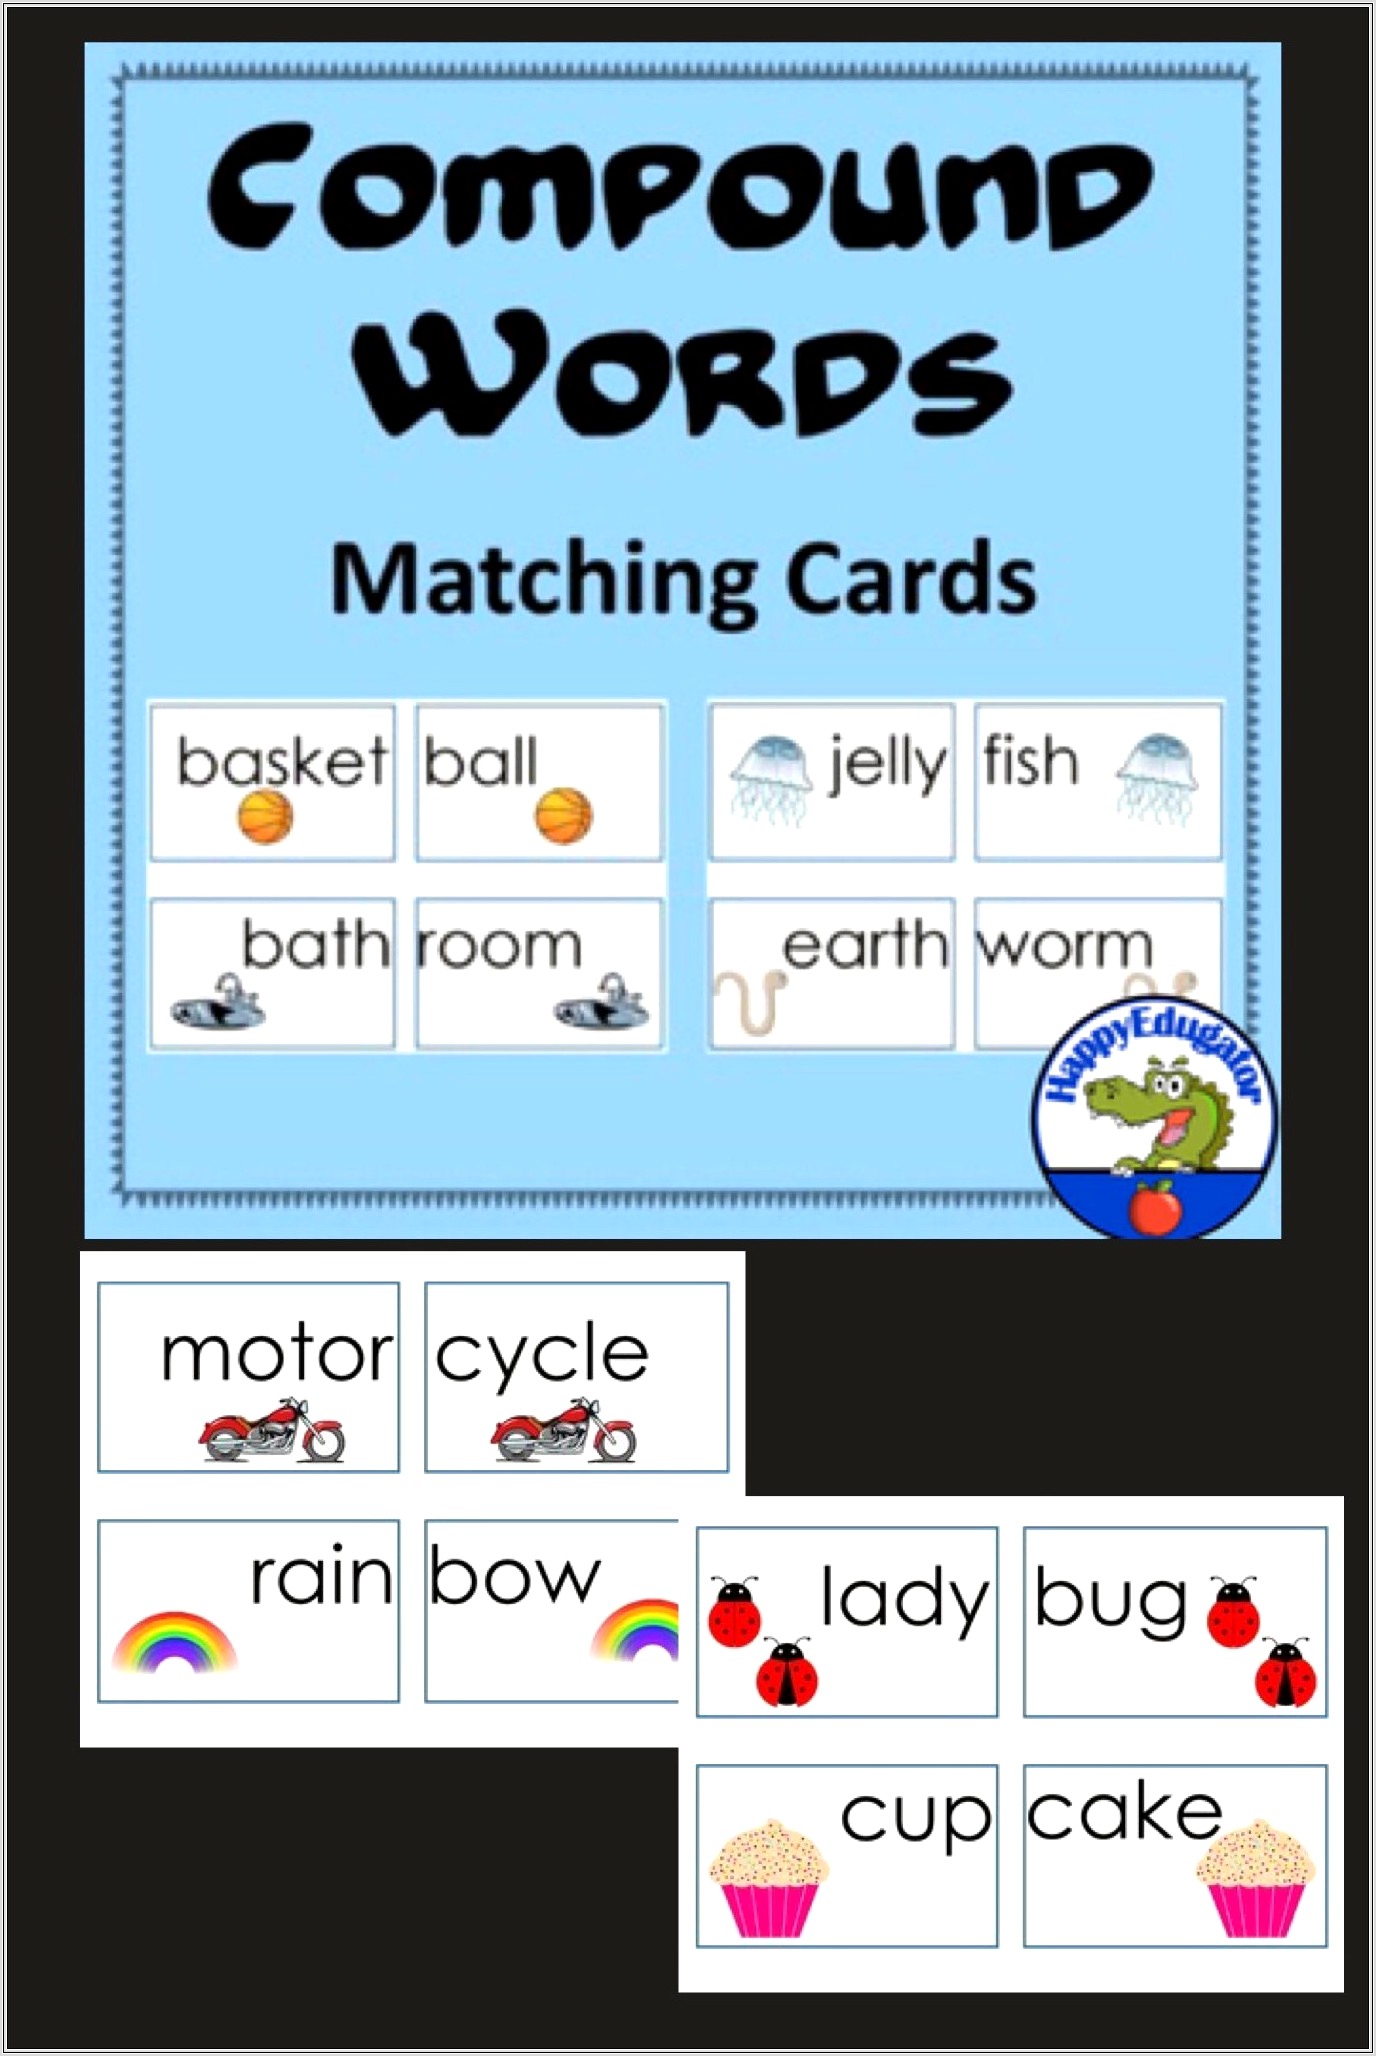 Compound Words Matching Cards